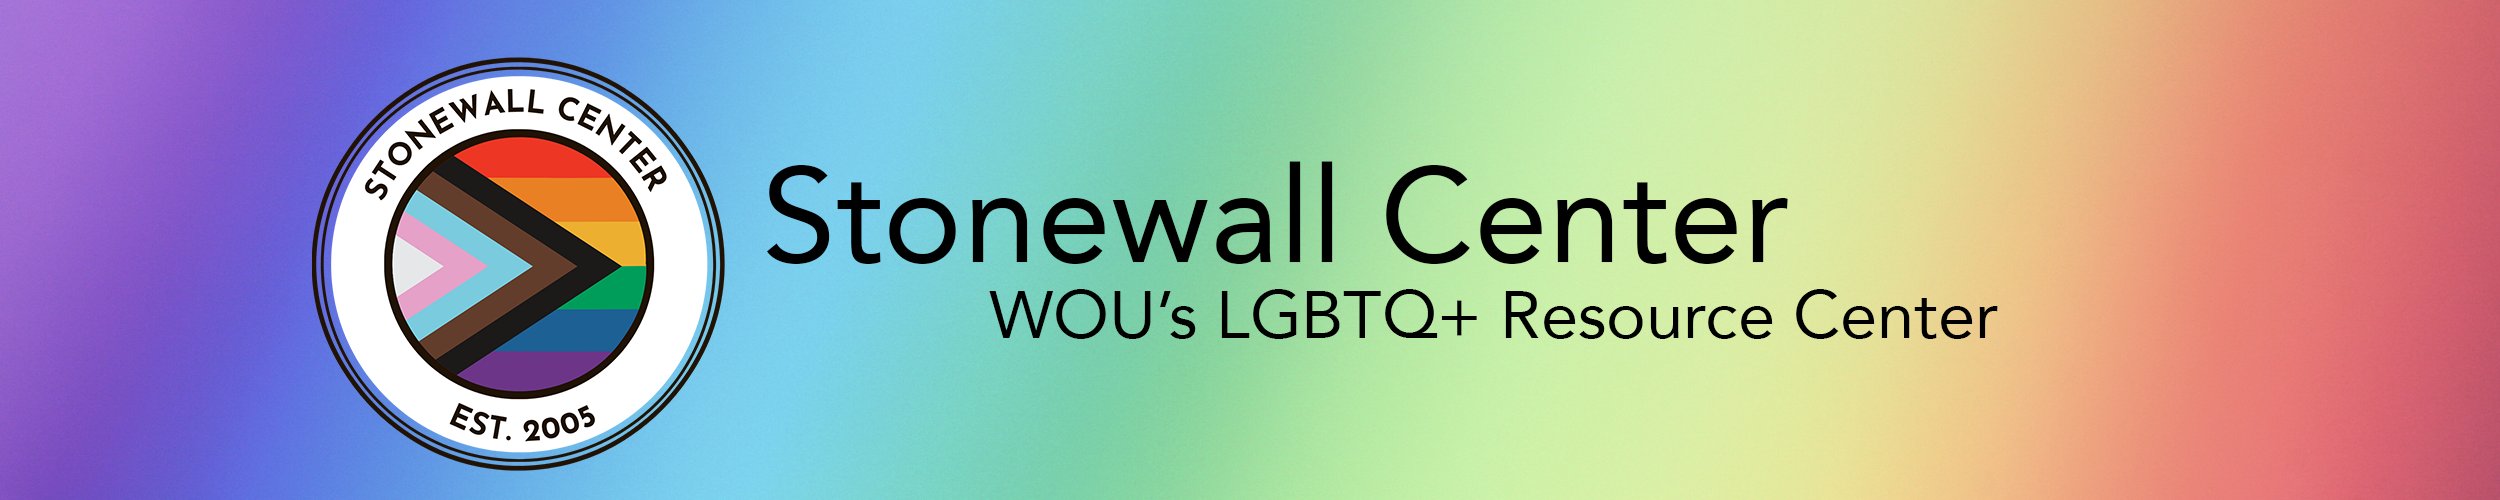 Stone wall banner with the Stonewall Logo and the words: Stonewall Center WOU's LGBTQ+ Resource Center.